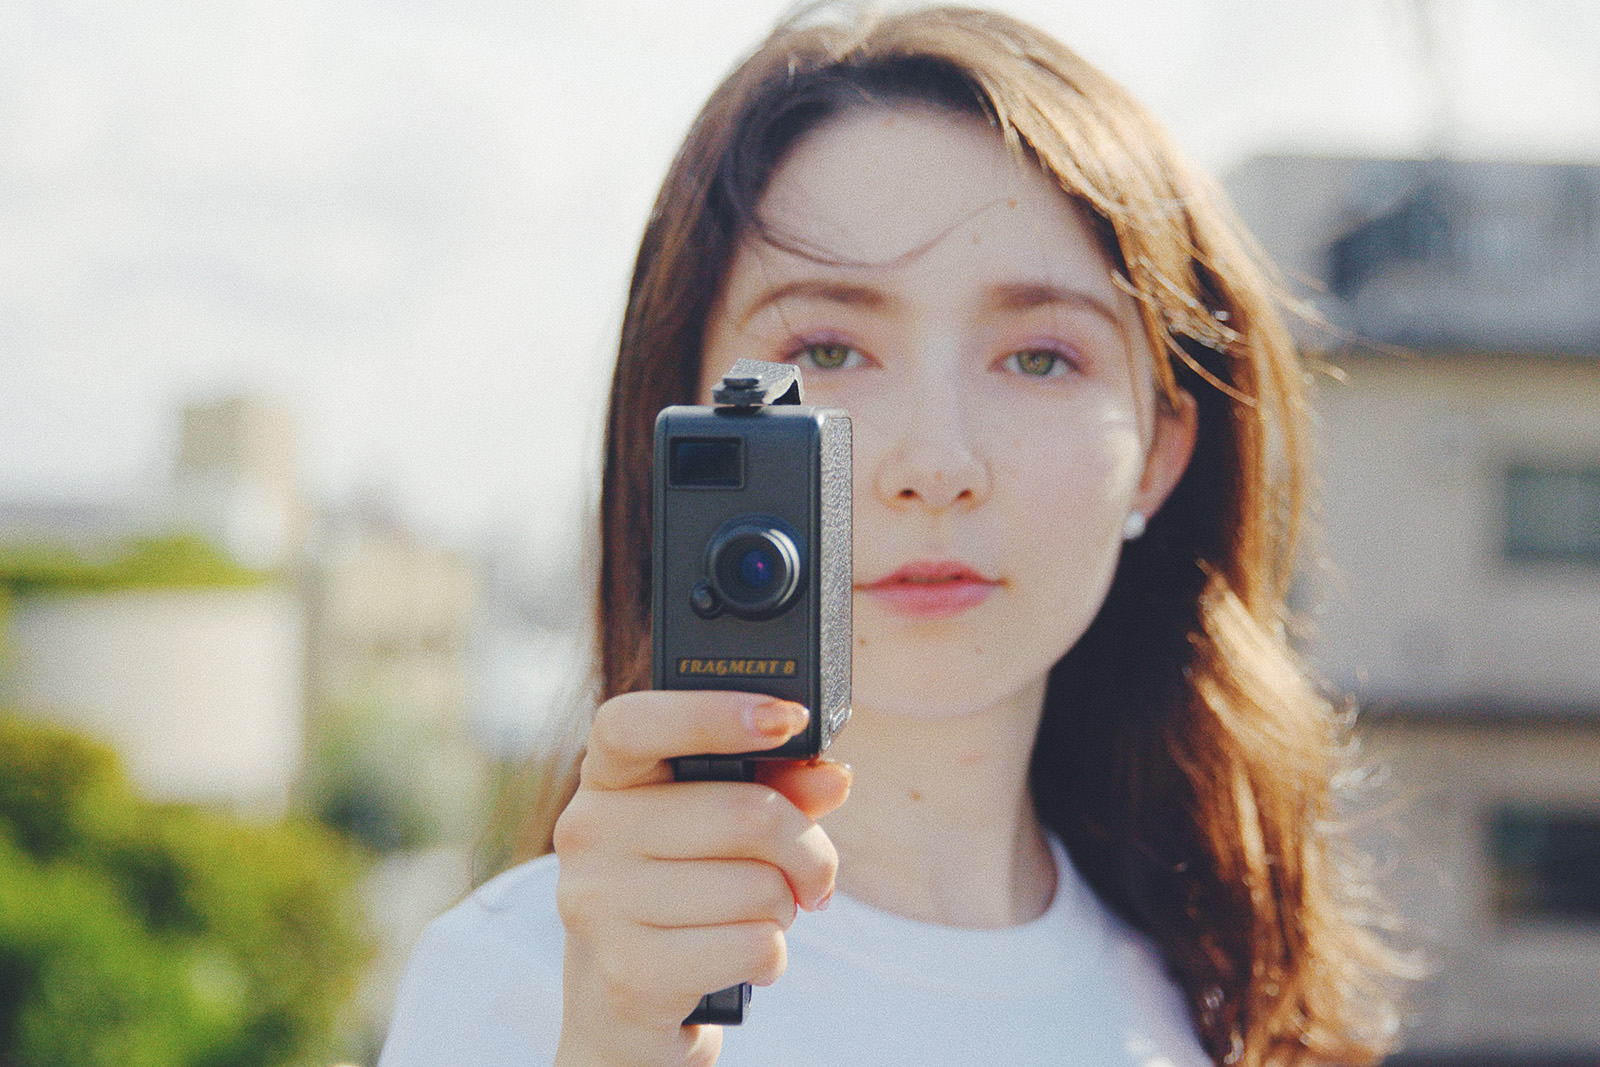 The Fragment 8 is a GIF Camera Inspired by Super 8 | Digital Trends